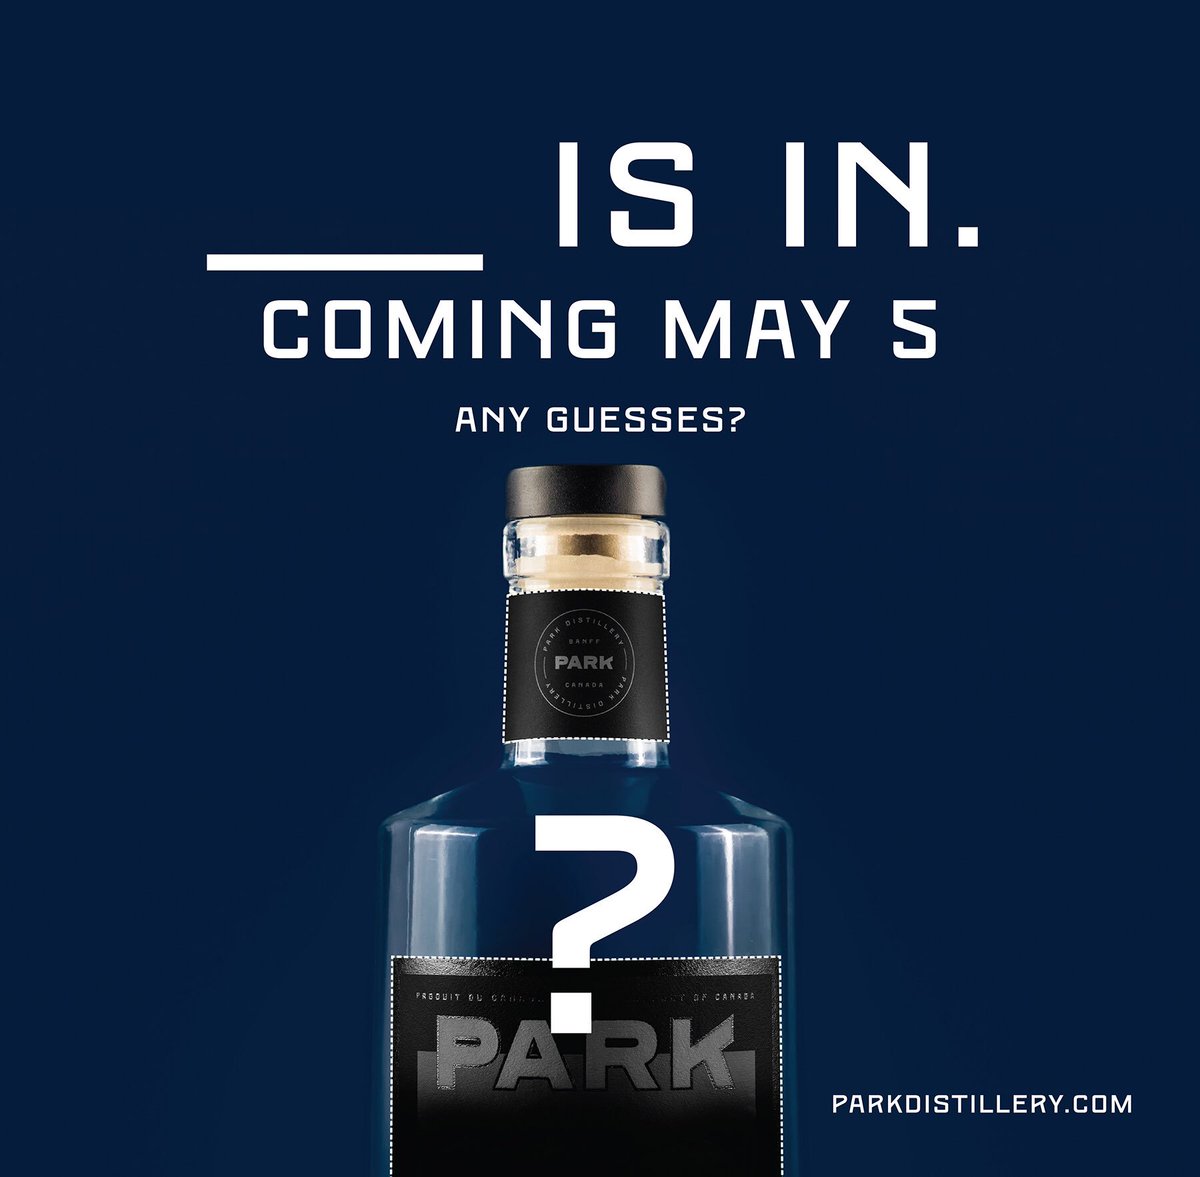 We are releasing a new spirit on Friday! Any guesses what it might be? #glaciertoglass